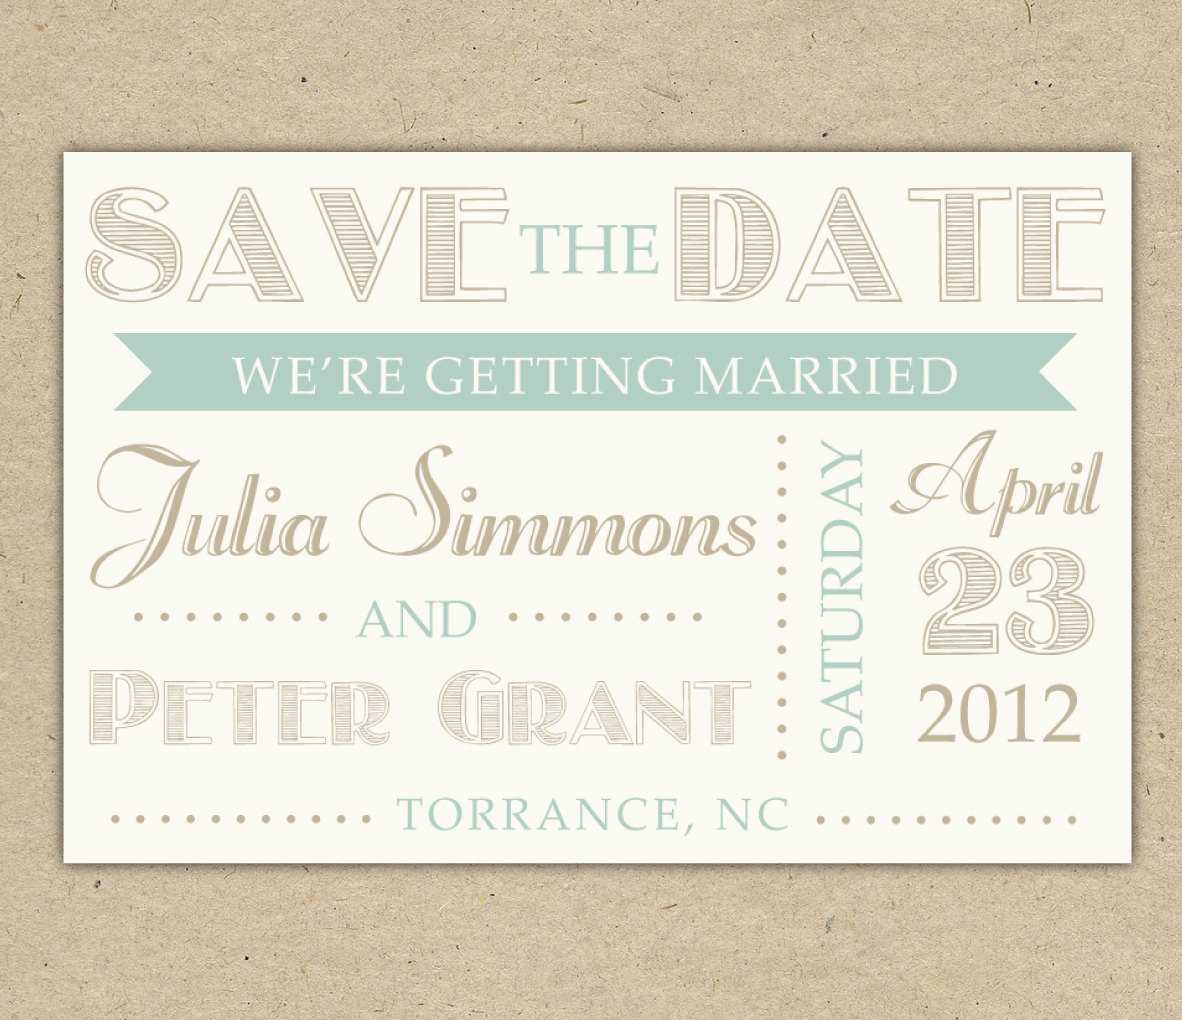 Save The Date Cards Templates For Weddings With Save The Date Cards Templates